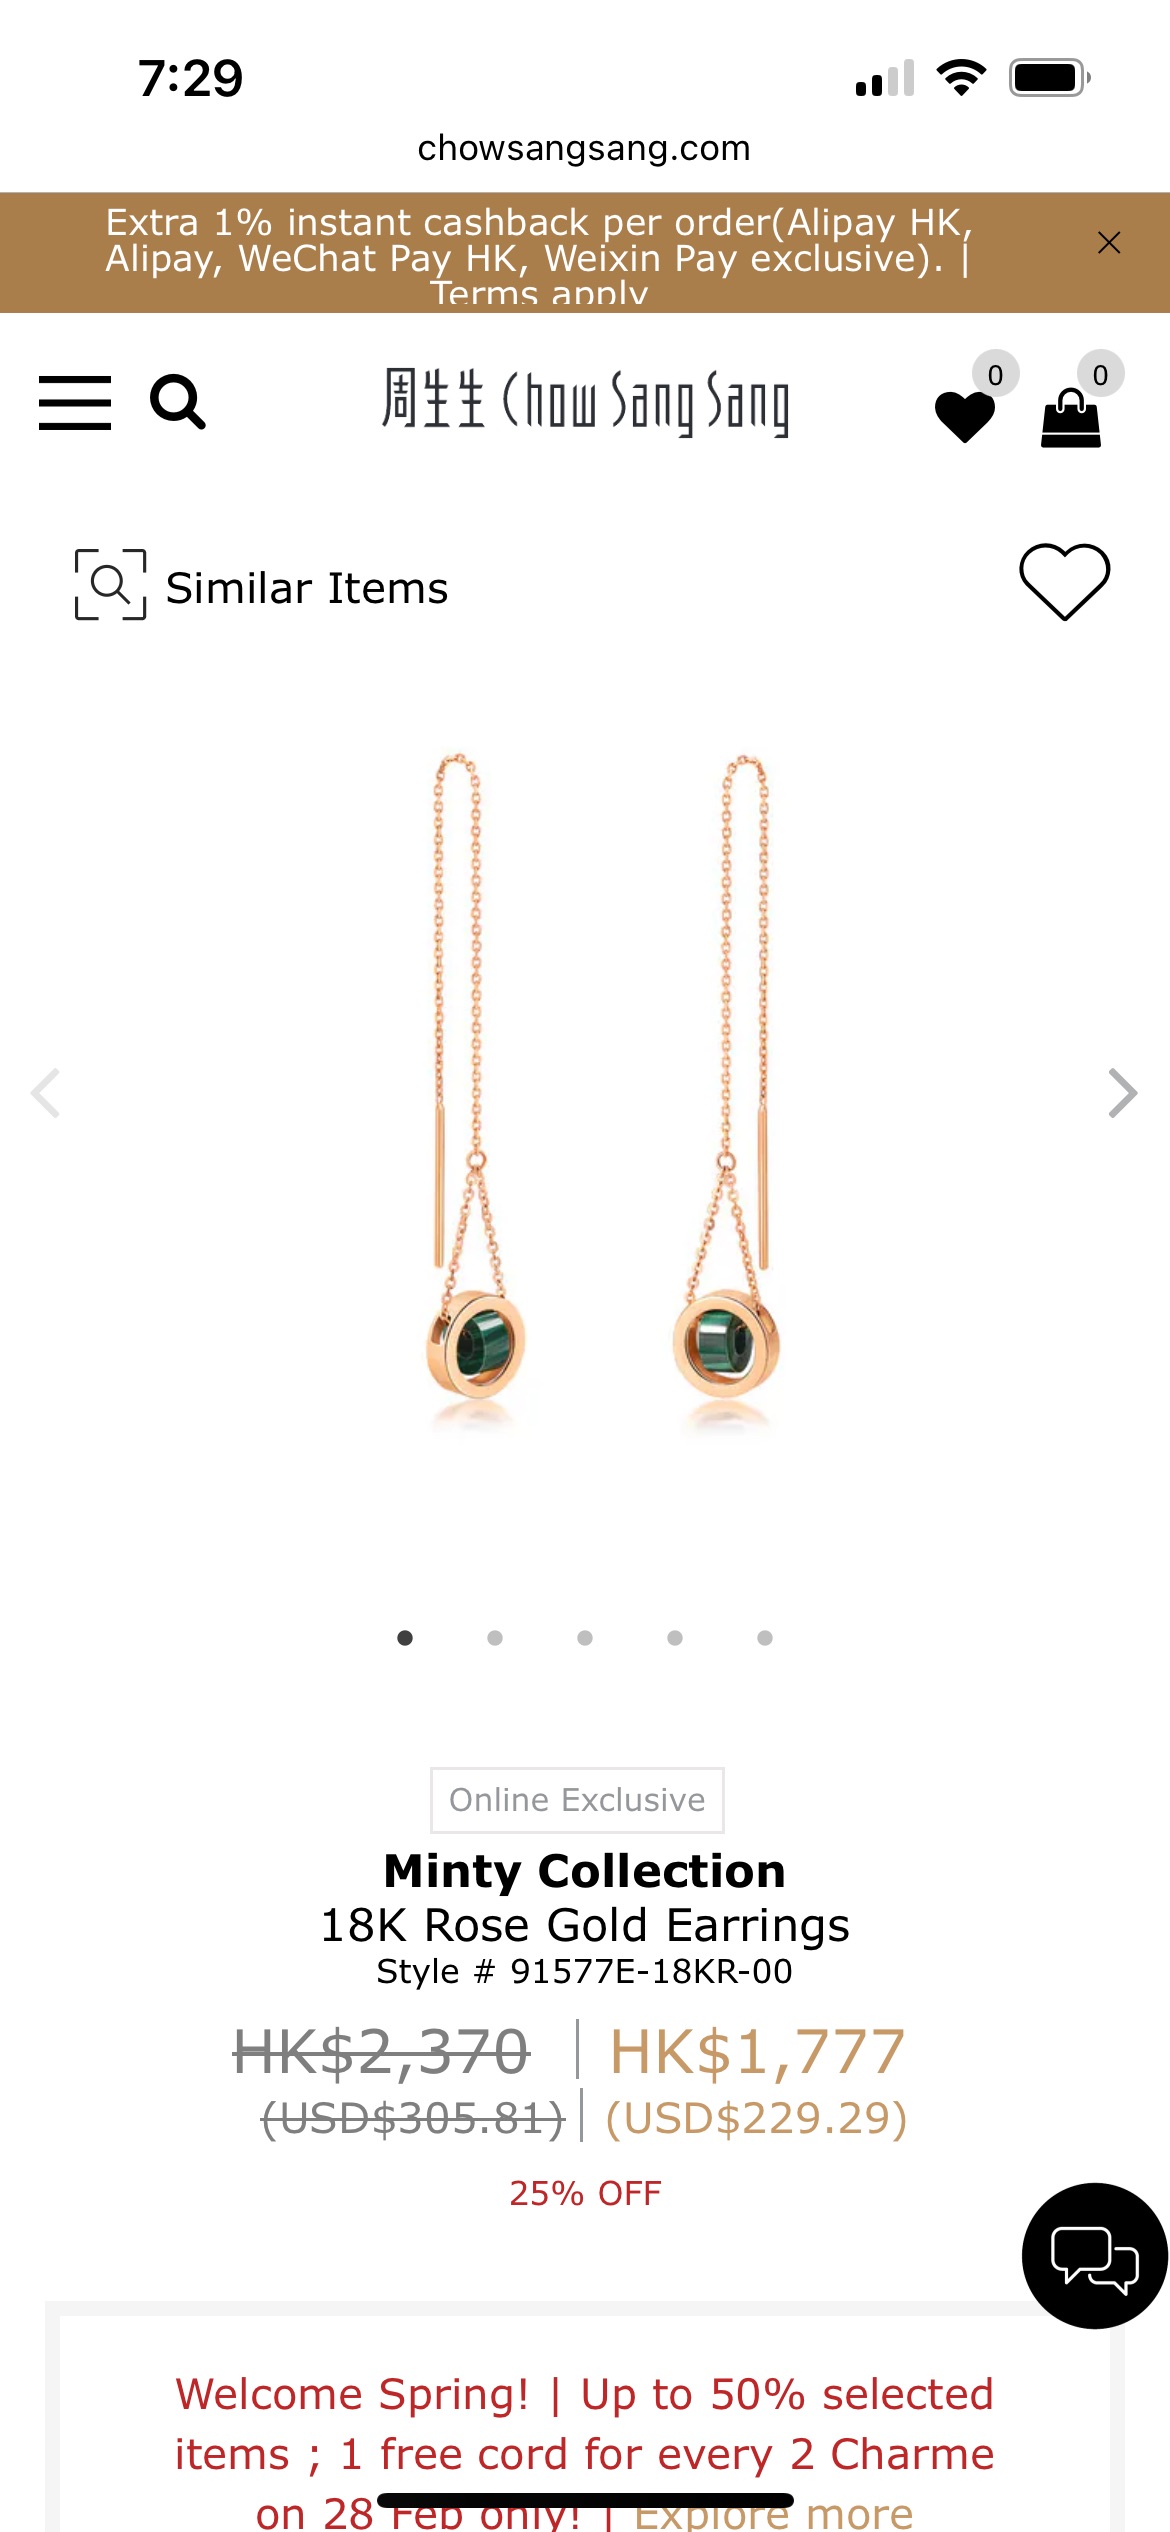 Minty Collection 18K Rose Gold Earrings